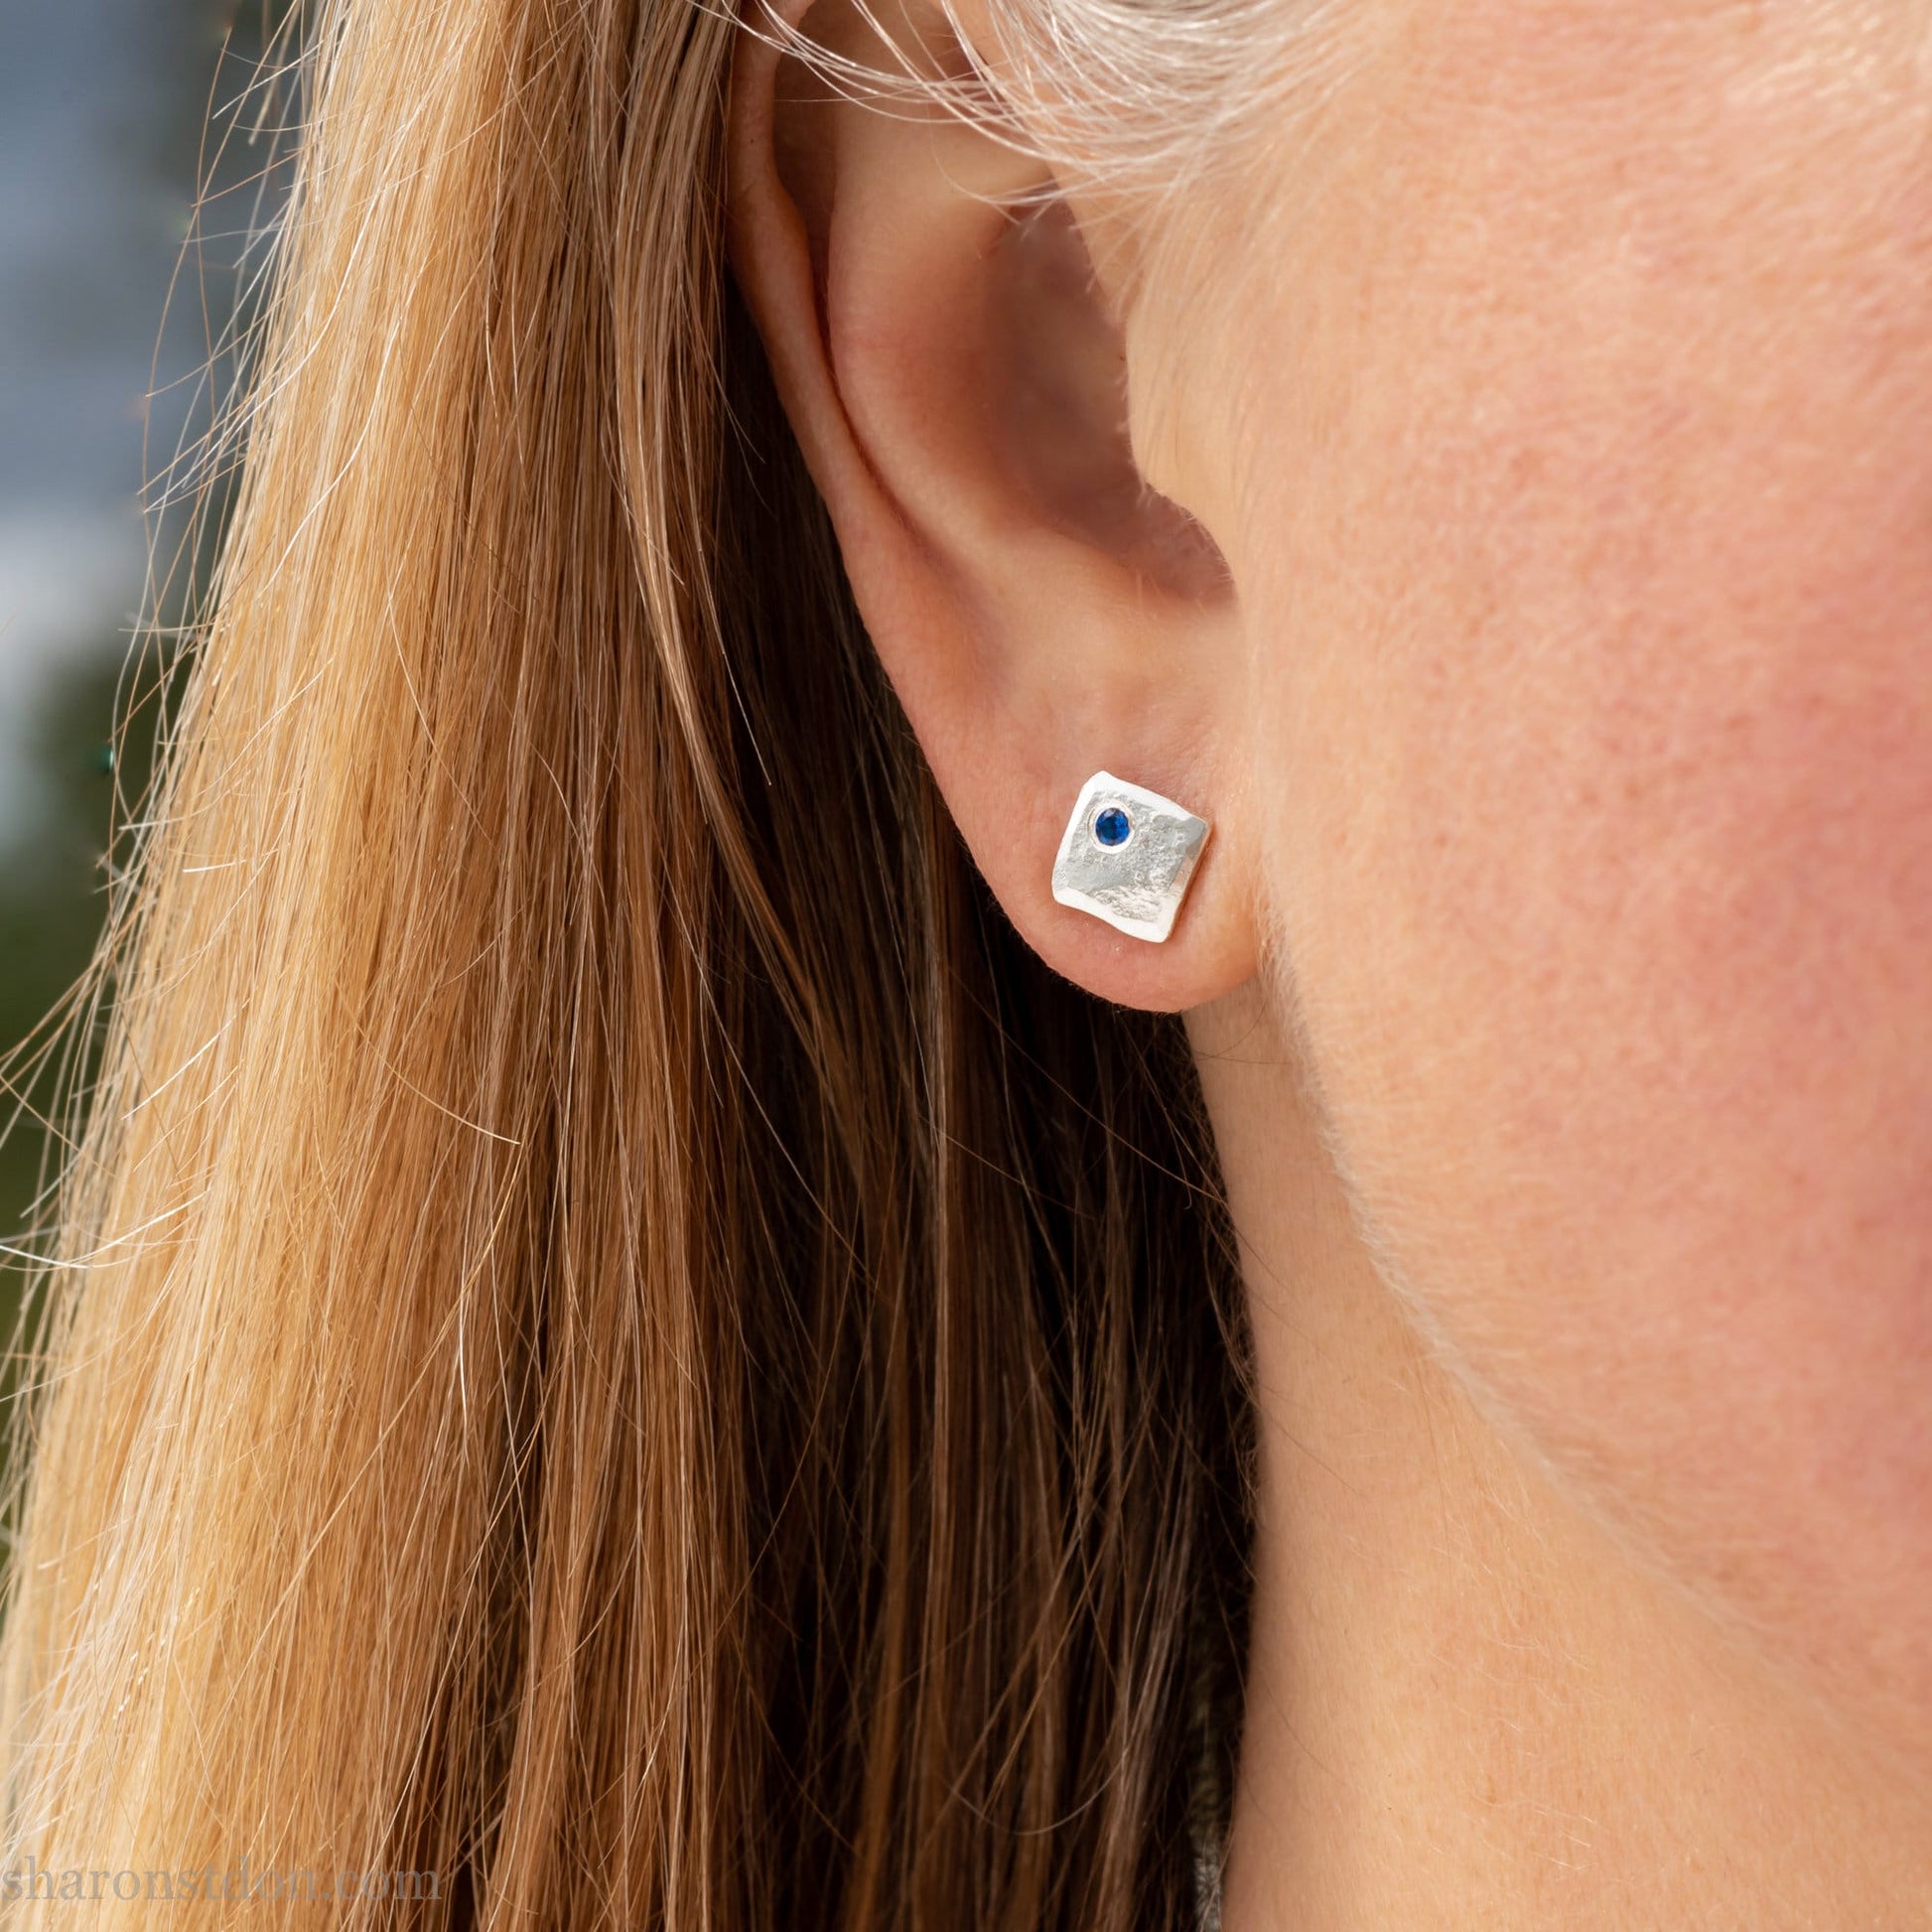 Handmade 925 sterling silver stud earrings with blue spinel gemstones. Daily wear small square stud earrings made by Sharon SaintDon in North America.